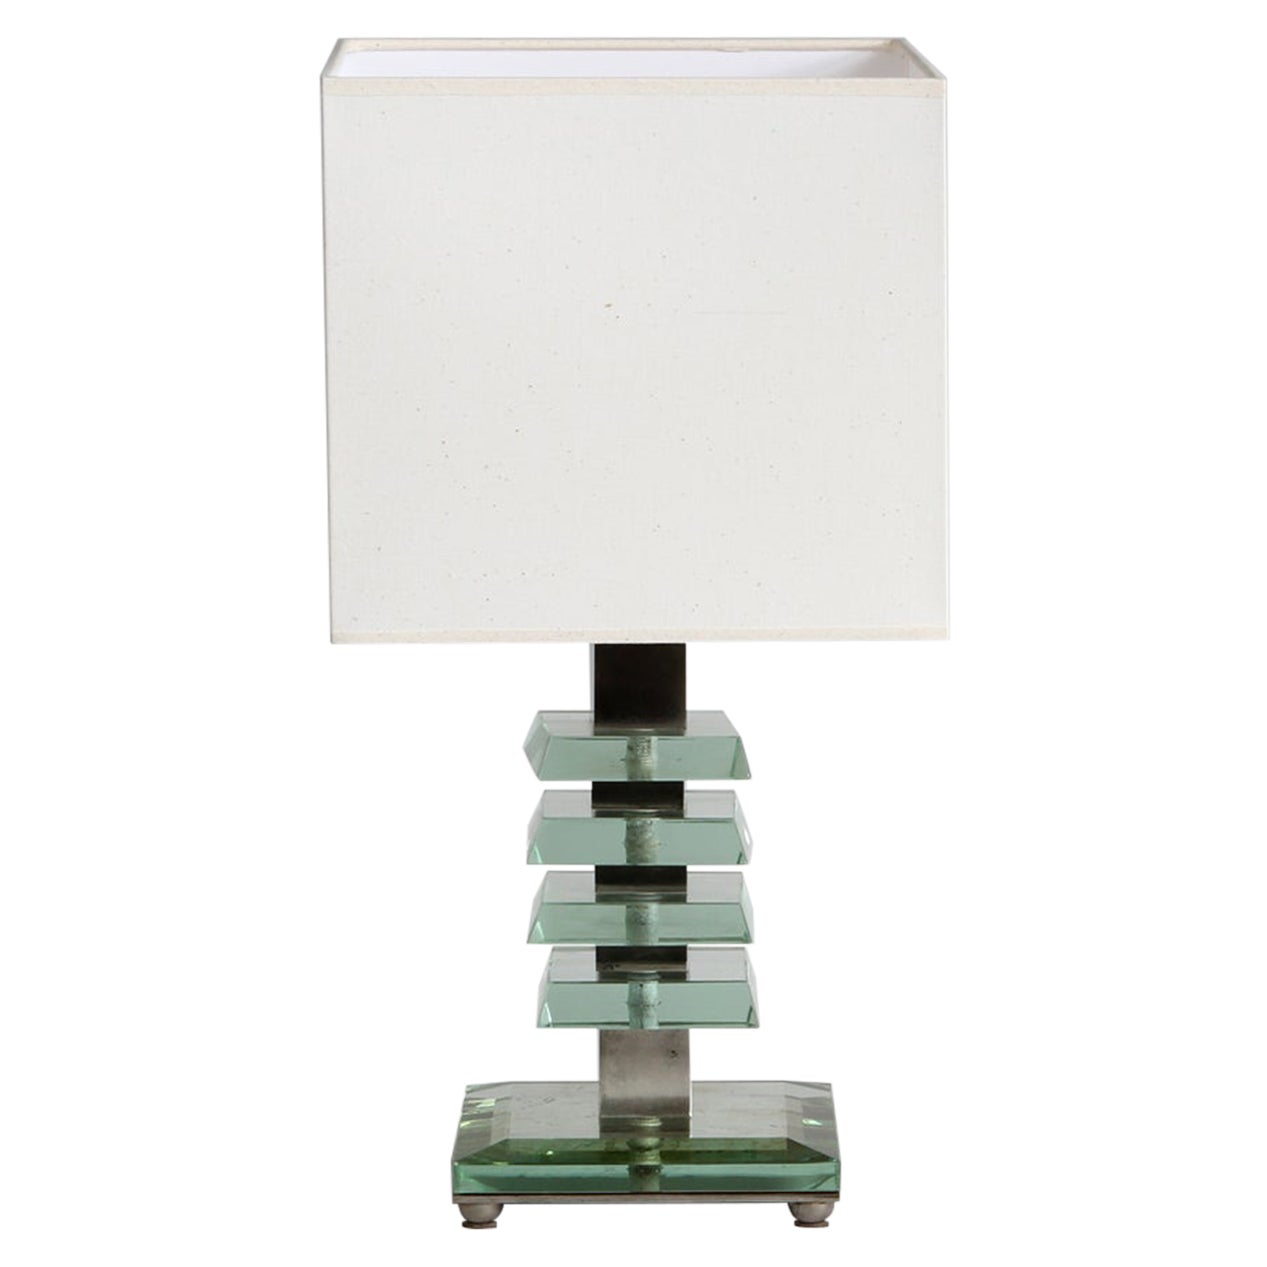 French Art Deco table lamp by Desny